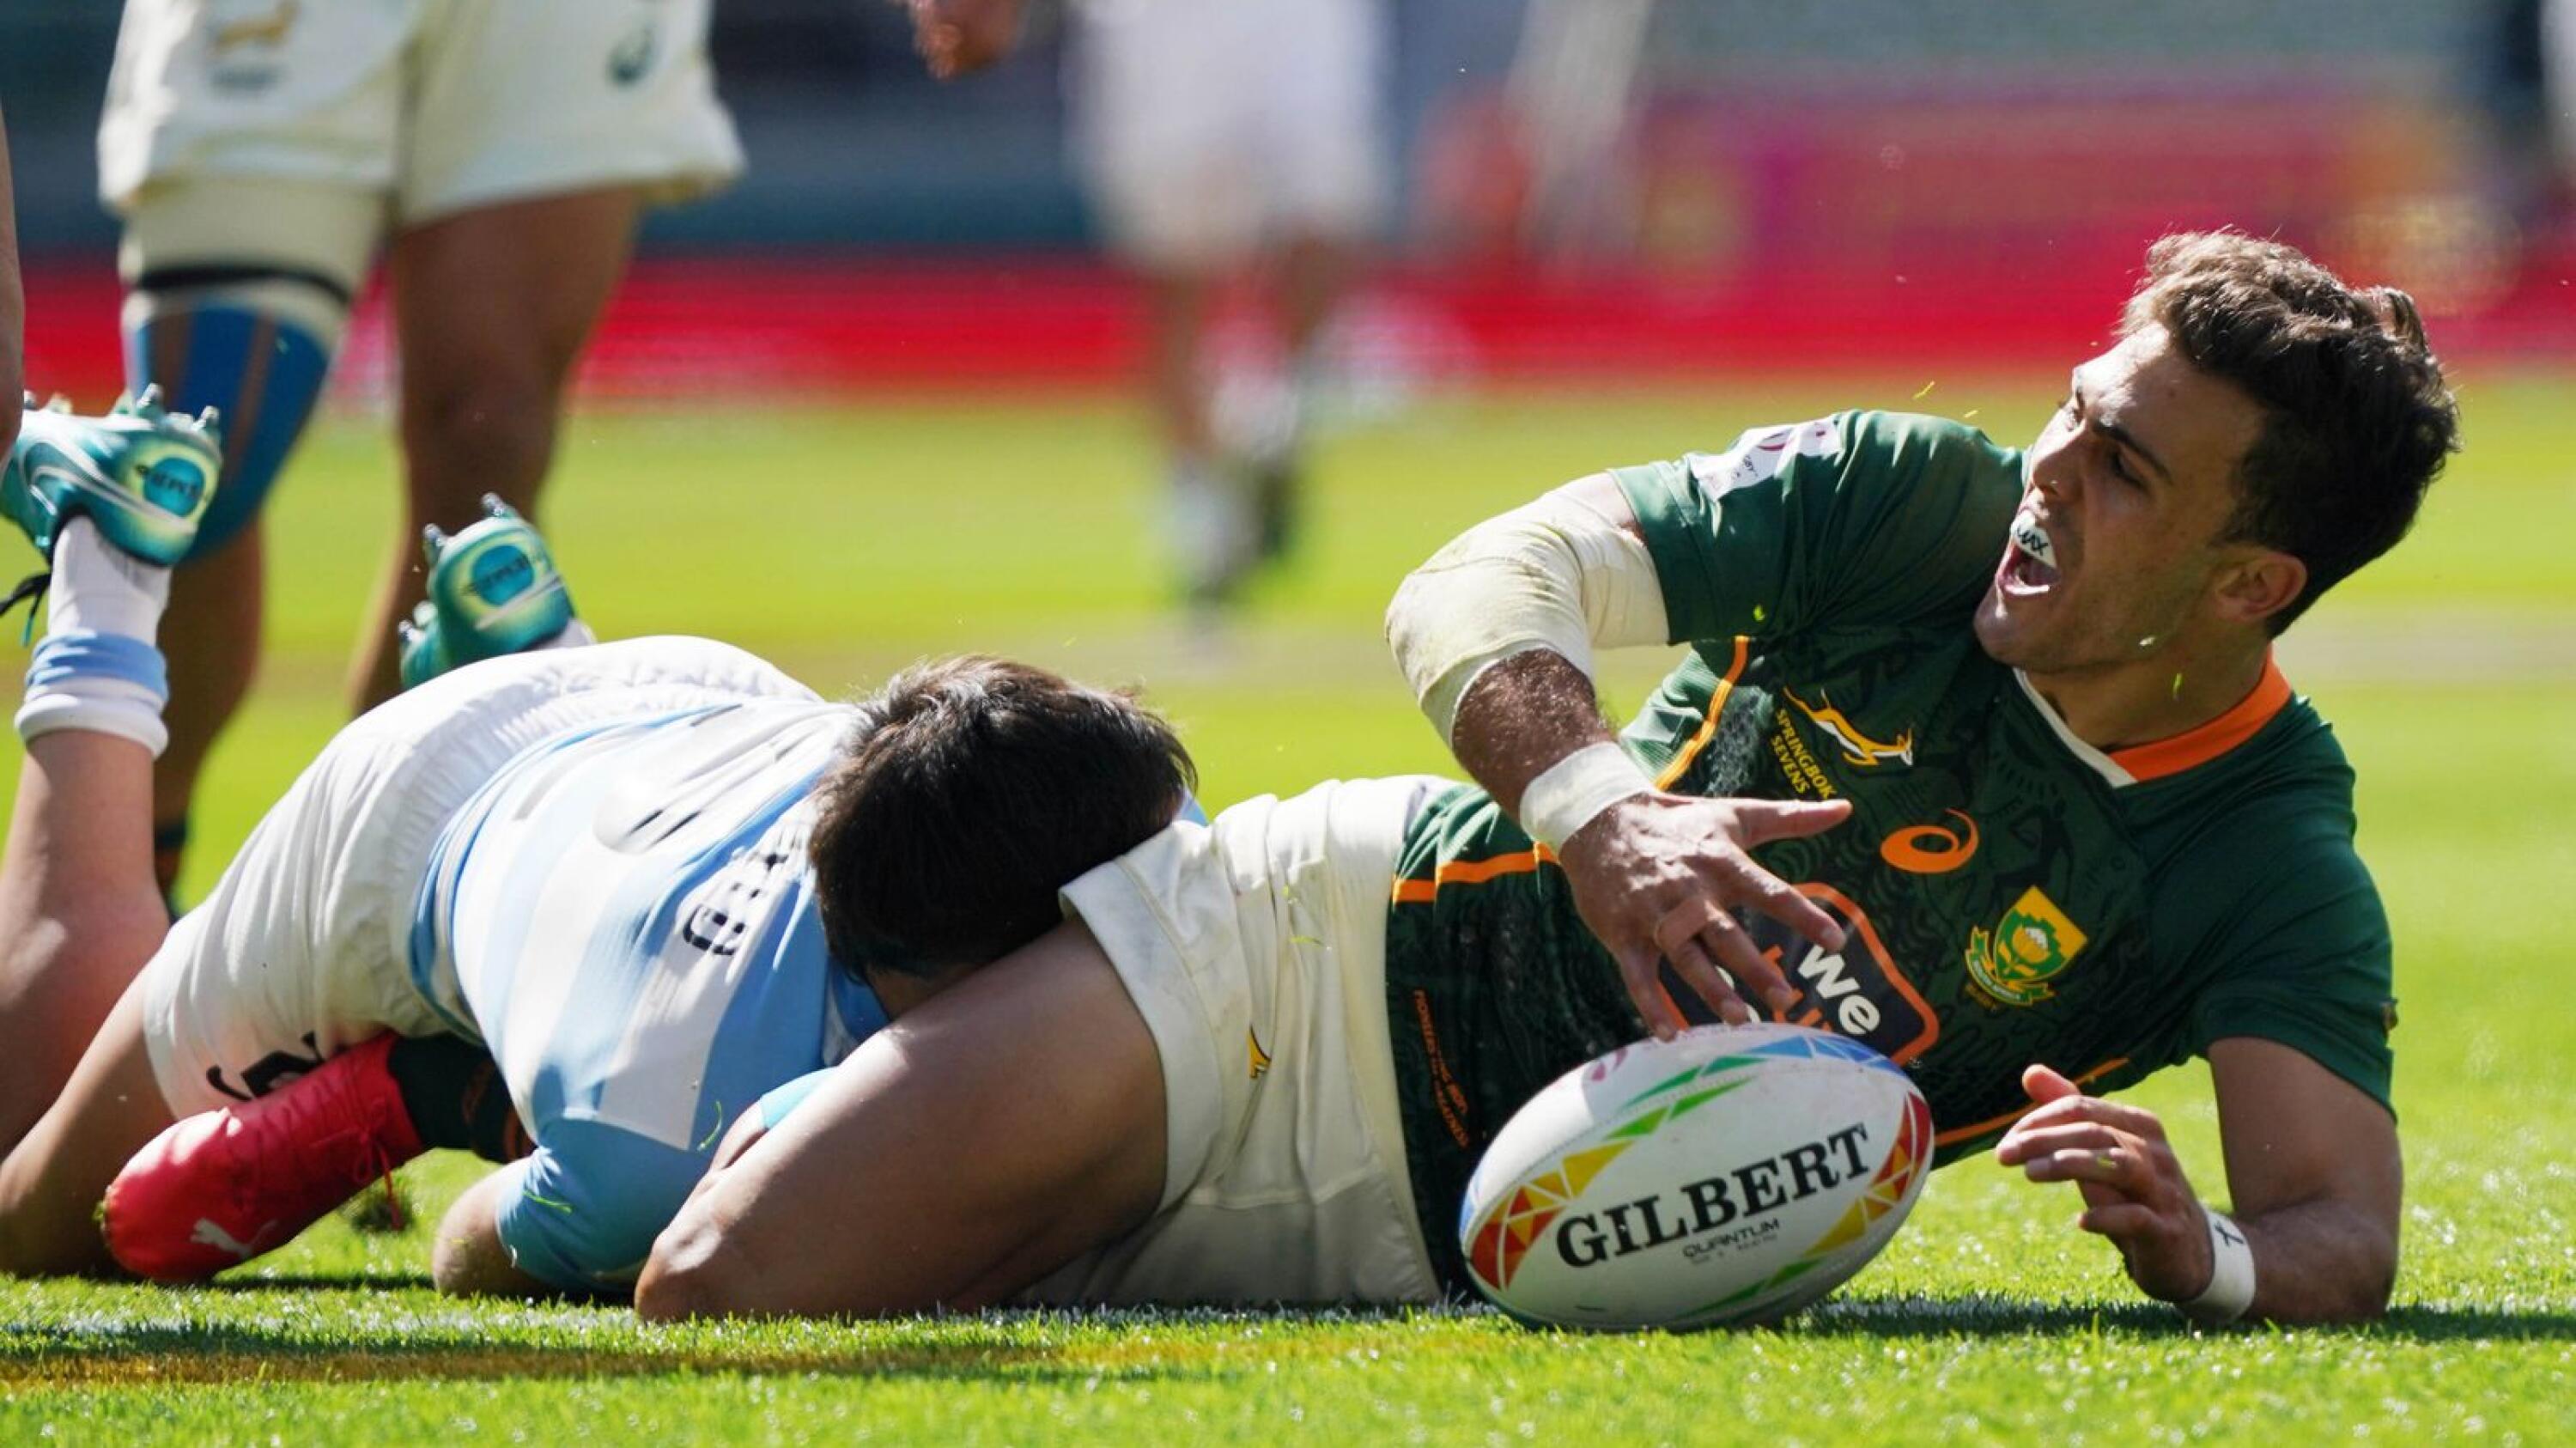 Following a poor showing at the Los Angeles Sevens, Muller du Plessis says the Blitzboks know exactly what to fix.